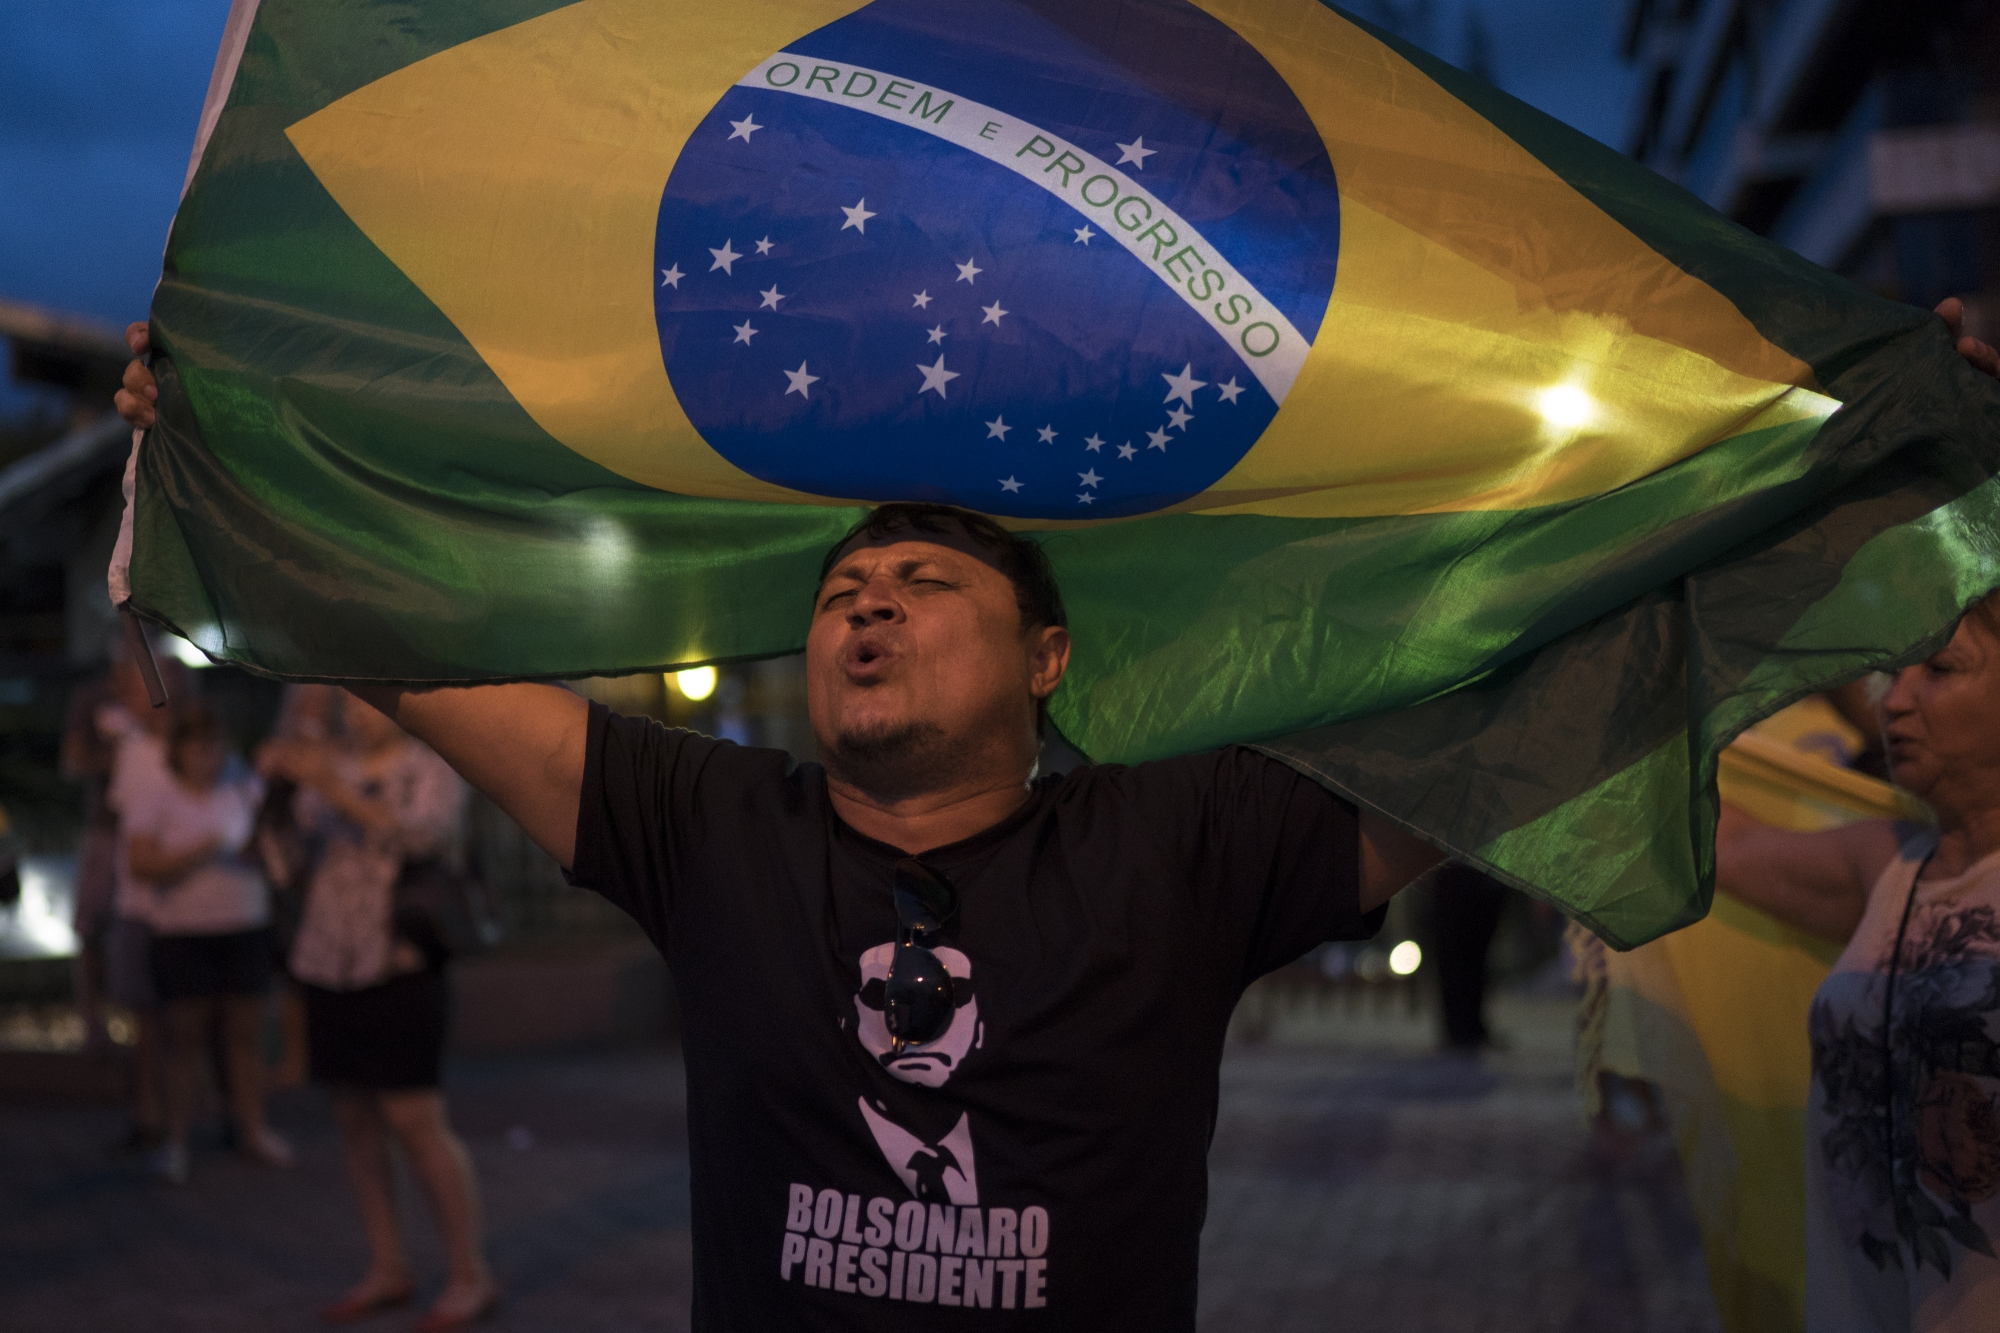 A man sing the Brazil's national anthem as he waves the national flag in support leading presidential candidate Jair Bolsonaro, outside Bolsonaro's residence in Rio de Janeiro, Brazil, Saturday, Sept. 29, 2018. Bolsonaro, who suffered intestinal damage and severe internal bleeding after the Sept. 6 attack at a campaign event and has undergone multiple surgeries, was discharged Saturday from a Sao Paulo hospital where he was being treated. (AP Photo/Leo Correa) Brazil Elections Bolsonaro